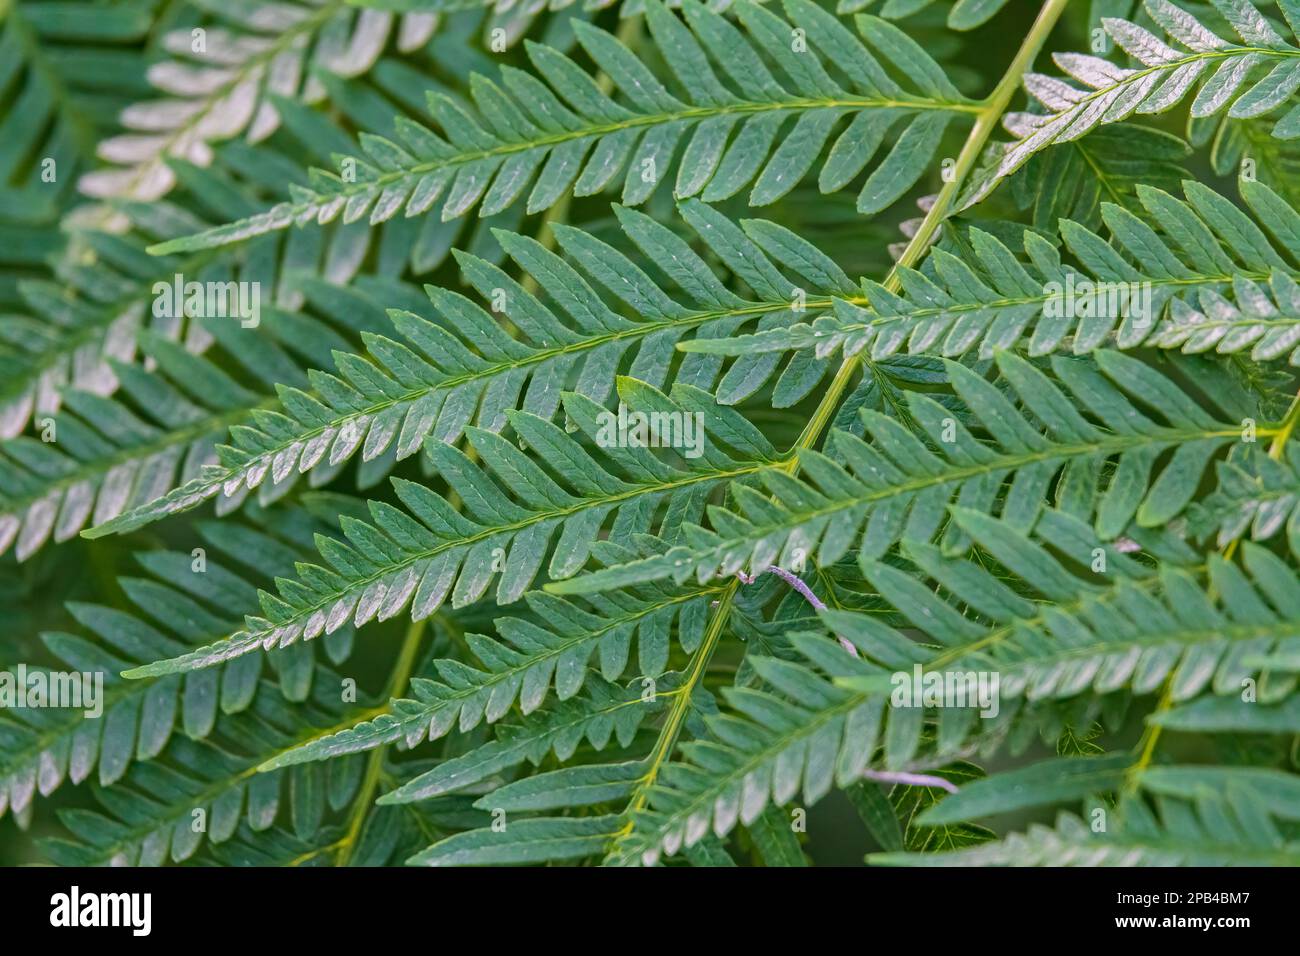 Green floral background. Fern leaves pattern Stock Photo